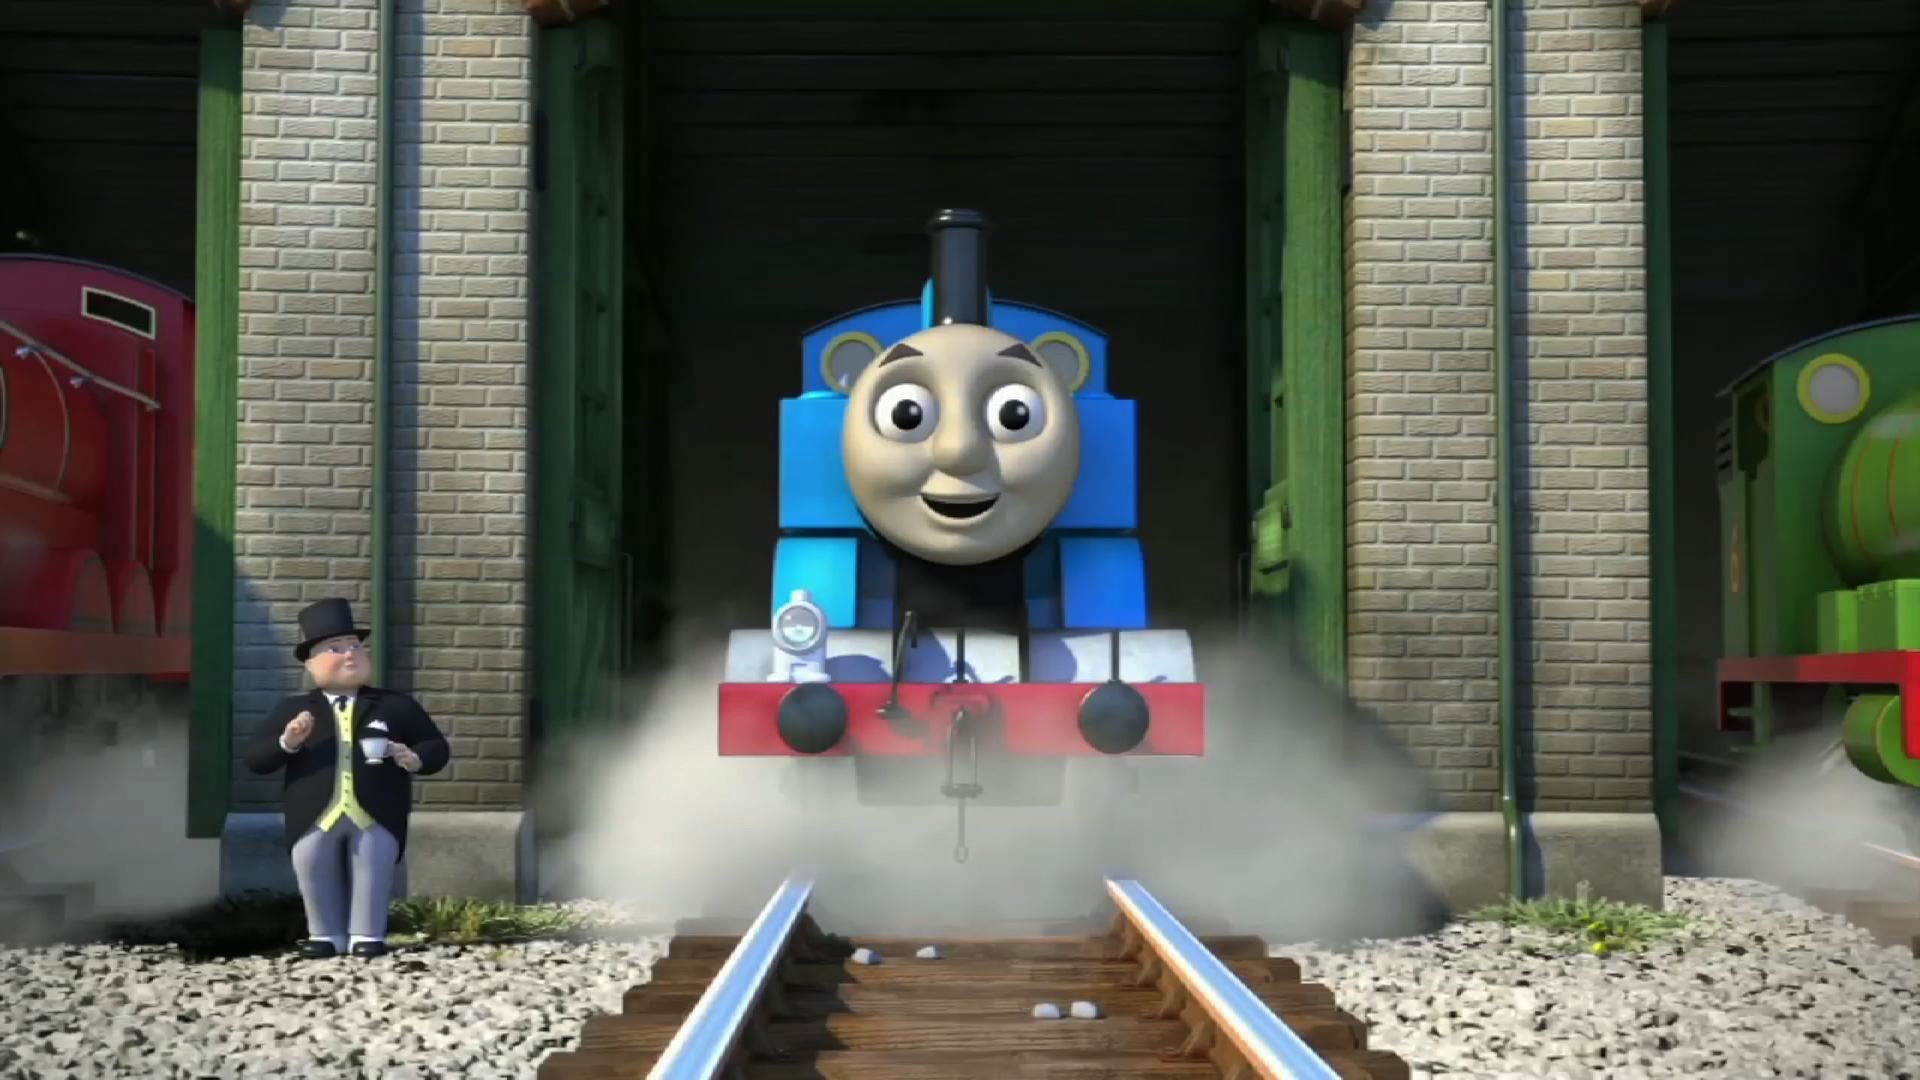 1920x1080 Girls are finally getting a bigger role in Thomas the Tank Engine's  boy-dominated world. The gender shakeup is just one of the many changes  coming to the ...